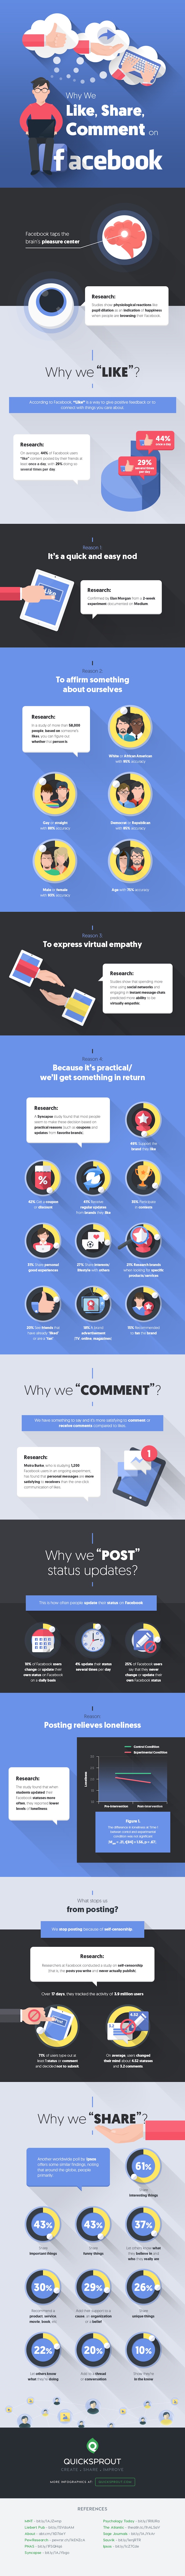 Why-We-Like-Share-Comment-on-Facebook-infographic.jpg